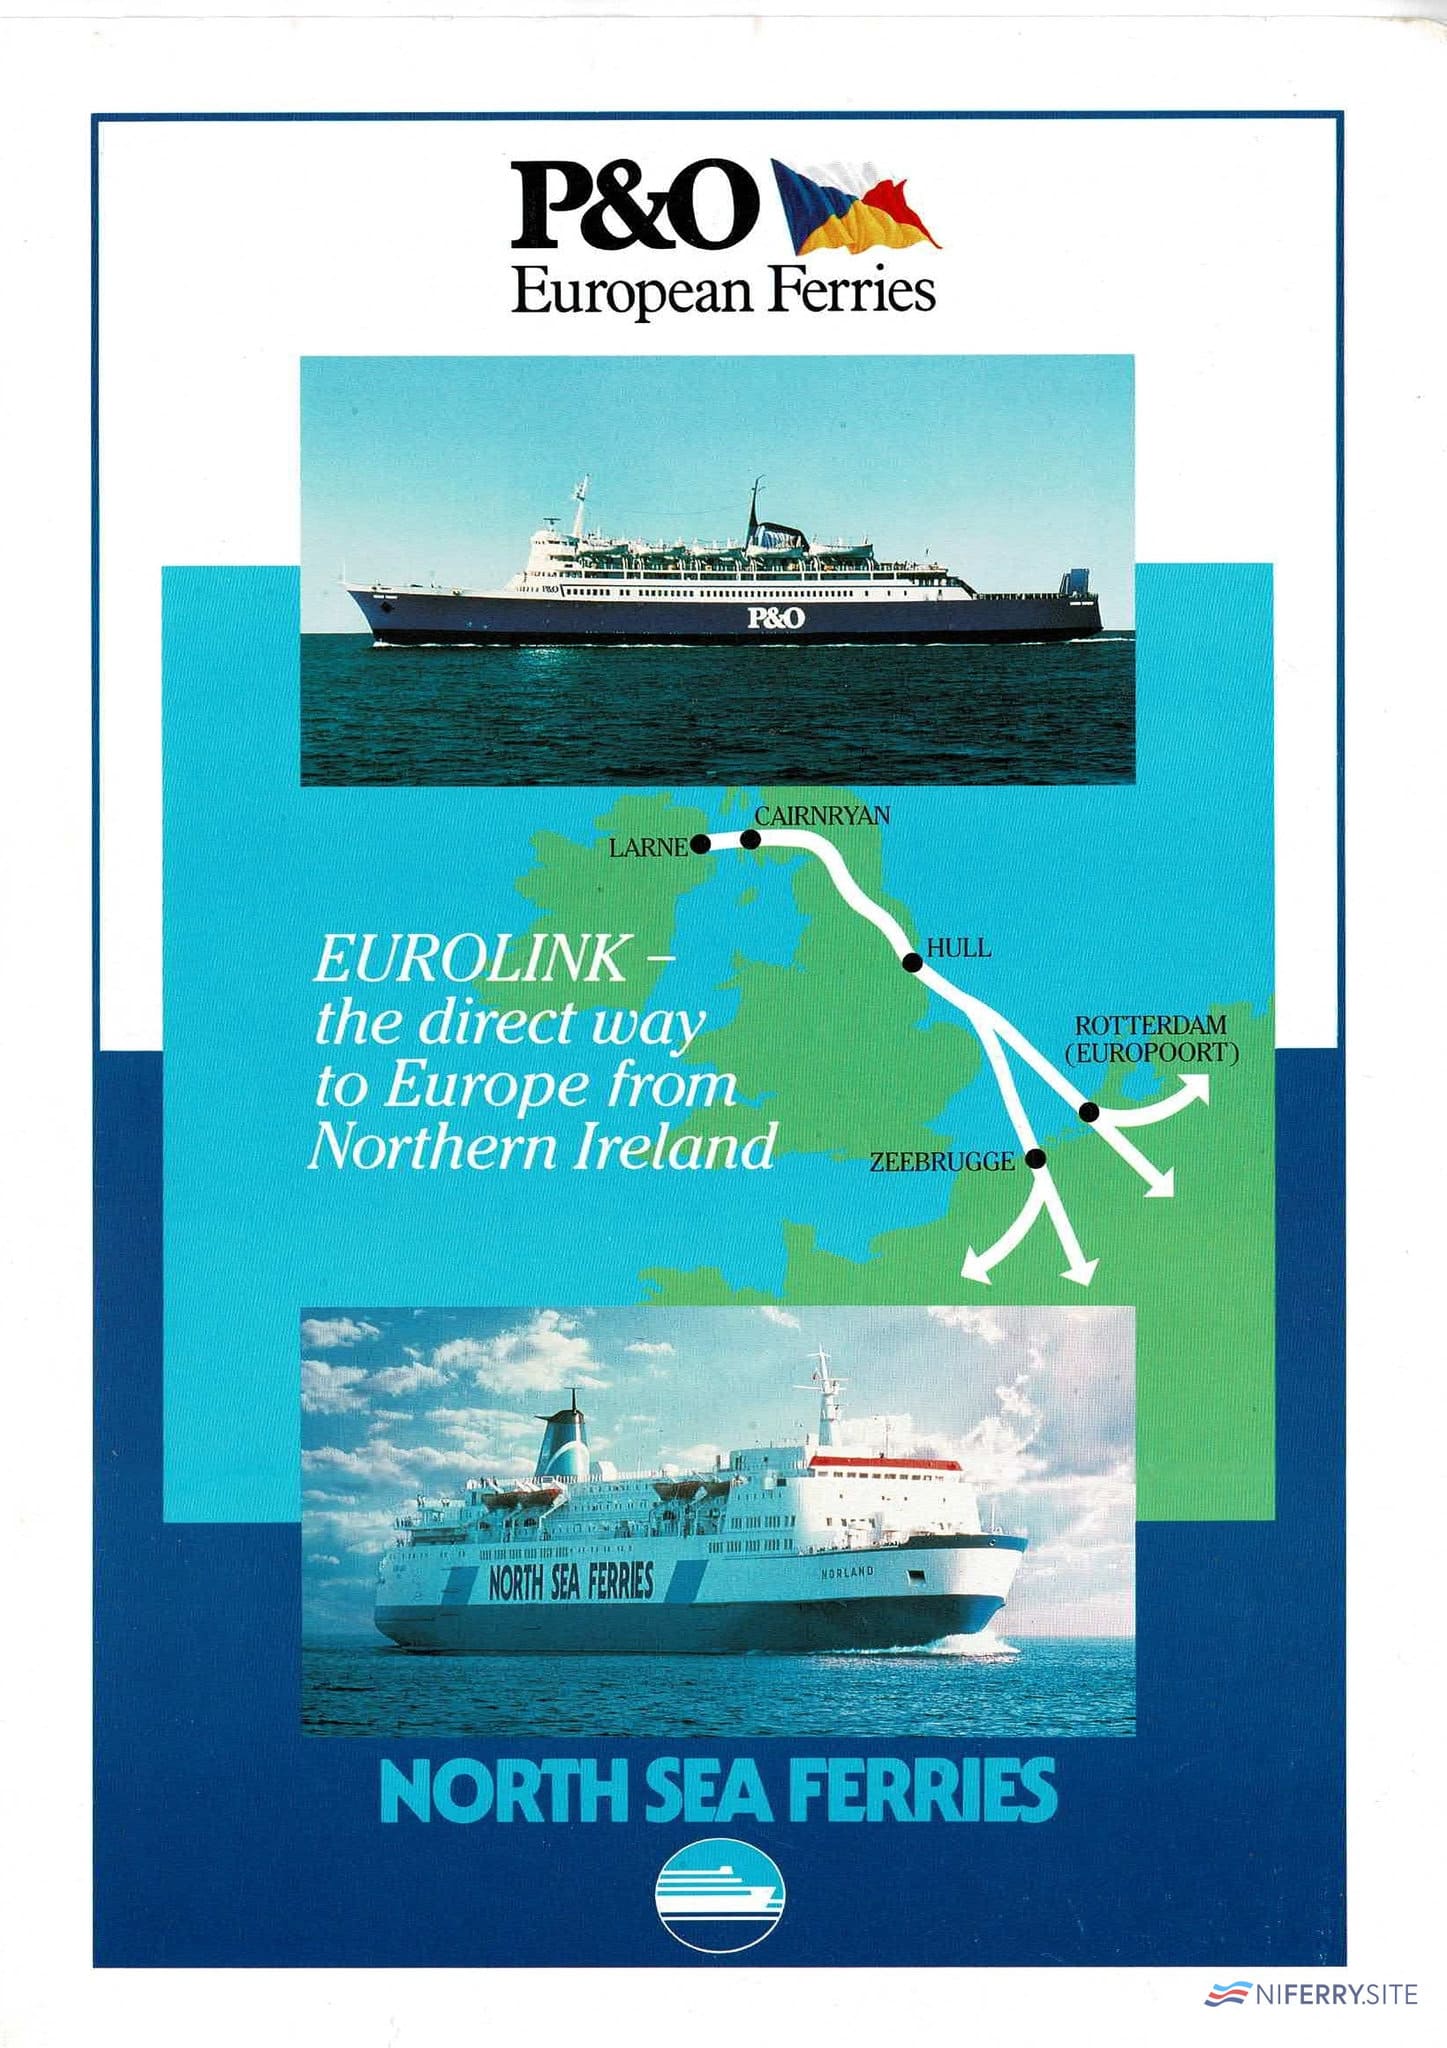 P&O European Ferries and North Sea Ferries joint land-bridge brochure (I think 1990). NI Ferry Site archive.